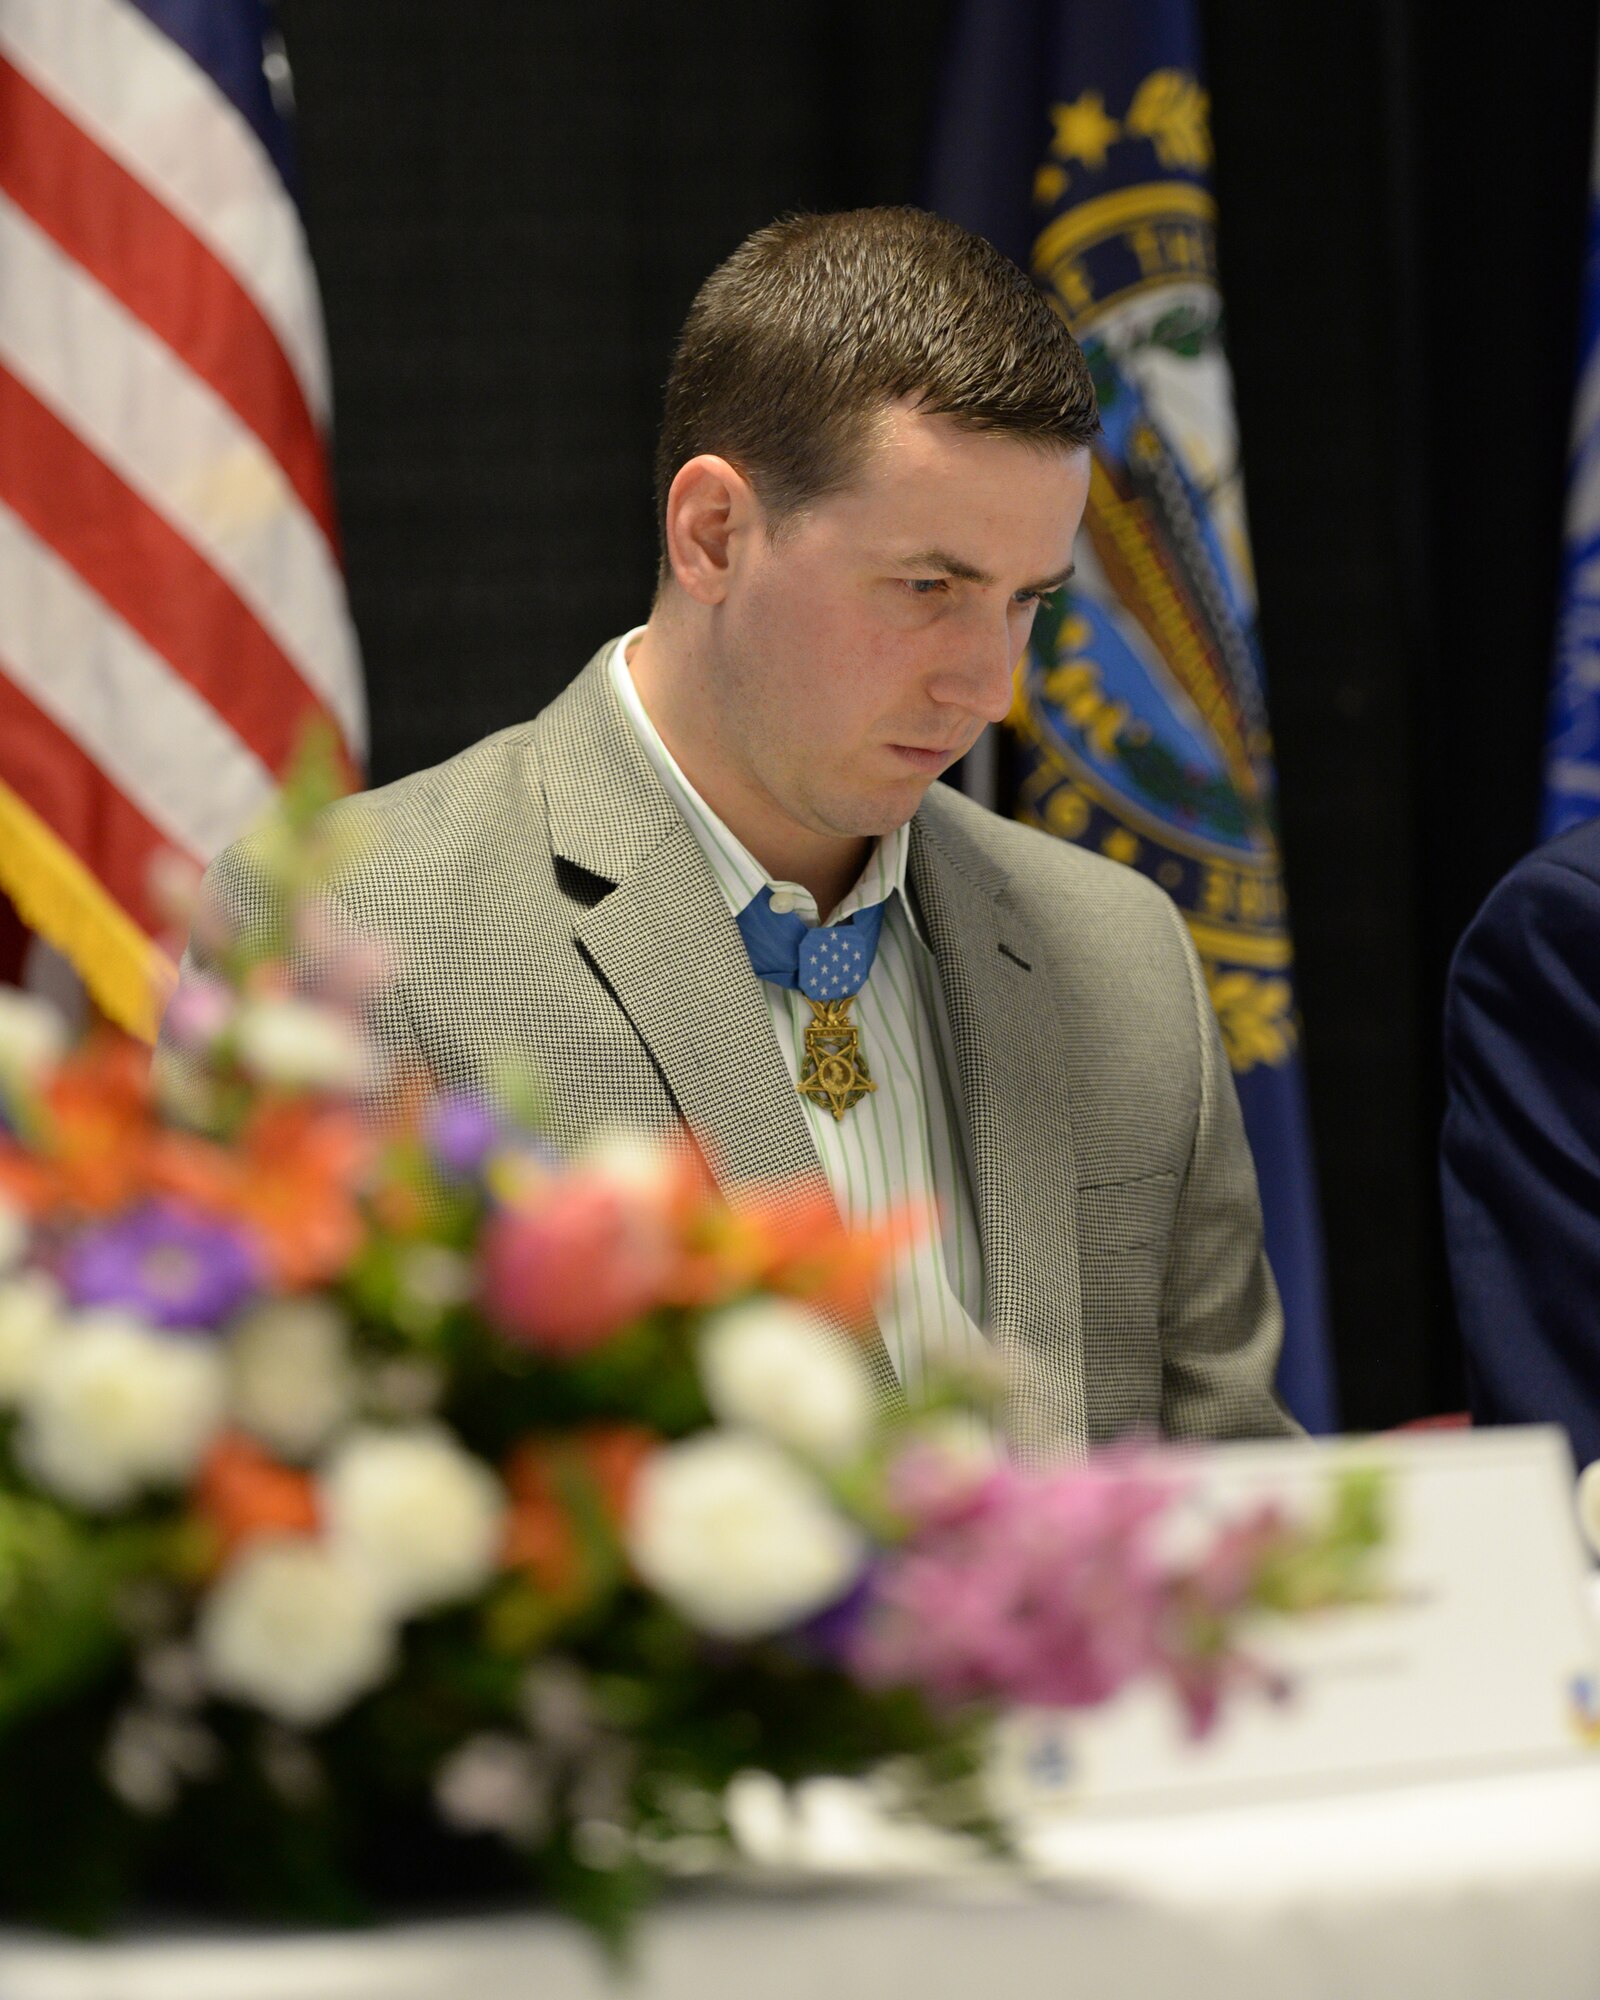 Former U.S. Army Staff Sgt. Ryan Pitts bows his head in prayer during the Commander’s Annual Prayer Breakfast, Pease Air National Guard Base, N.H. April 12, 2015.  Pitts, a 2014 Medal of Honor recipient was guest speaker at the event. (U.S. Air National Guard photo by Tech Sgt. Aaron P. Vezeau)